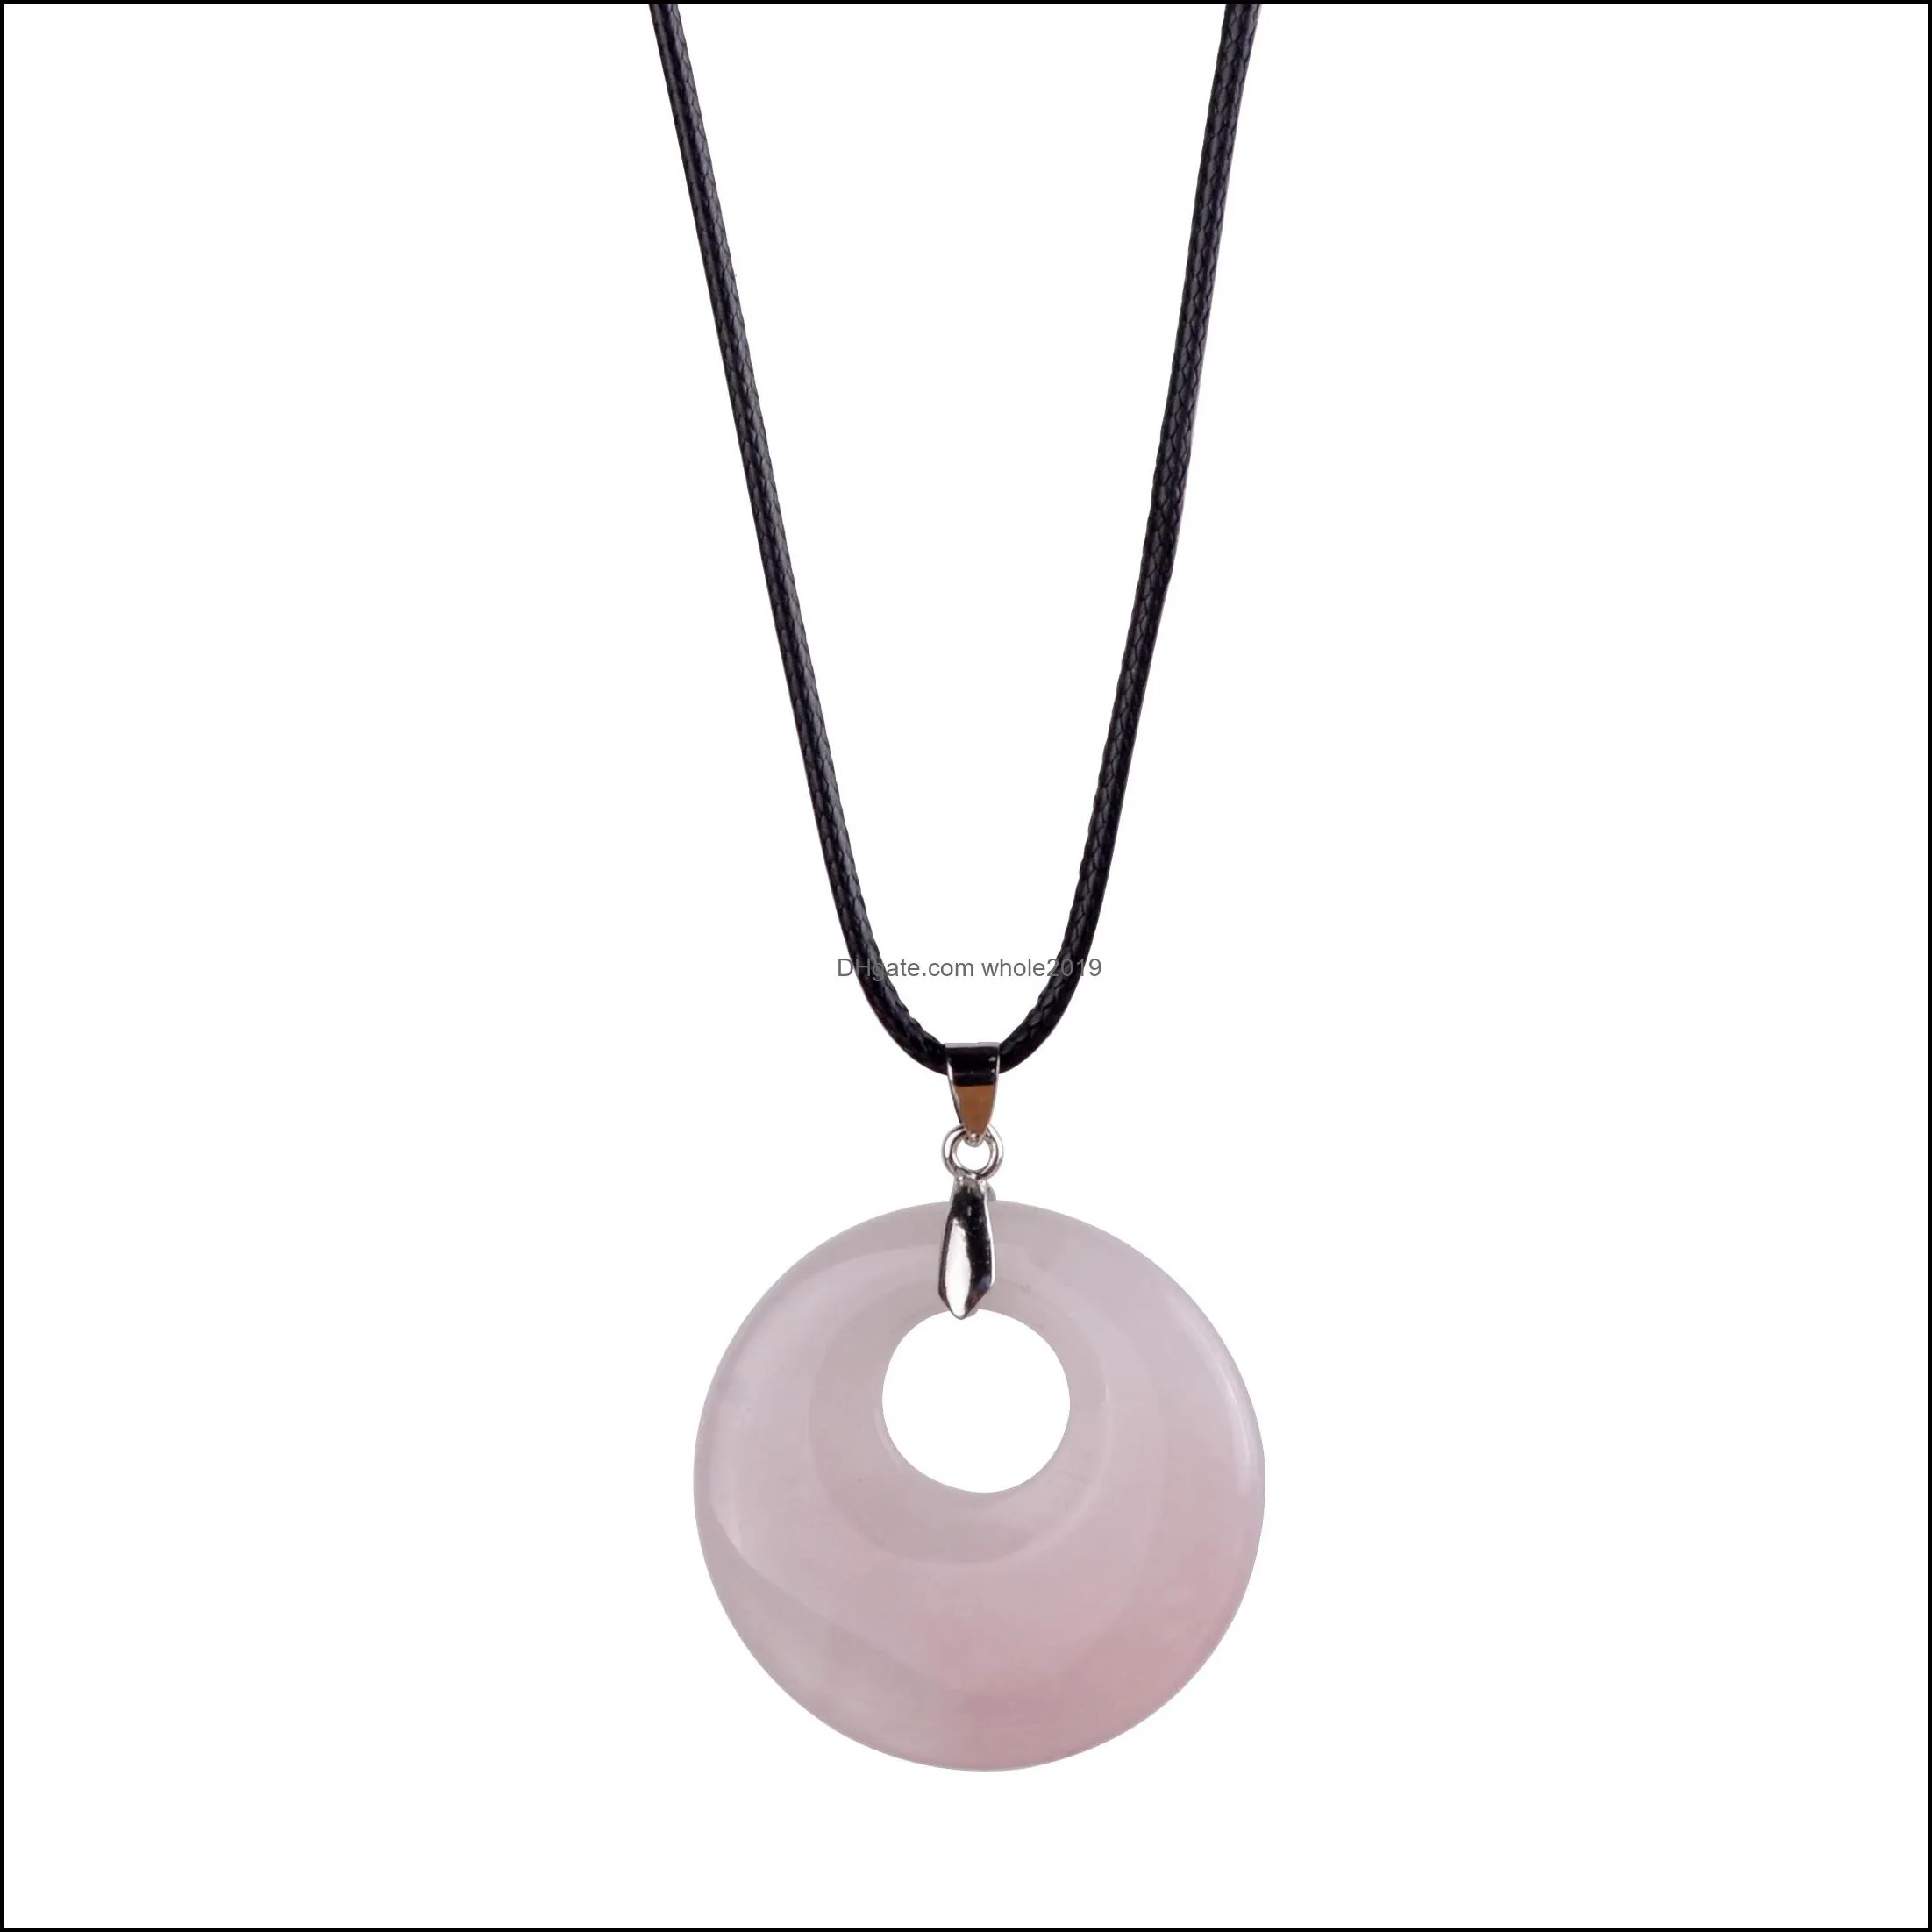 12pcs Round Gemstone Coin Necklace Material Natural Stone Healing Crystal Quartz Charm Neck Female Ornament